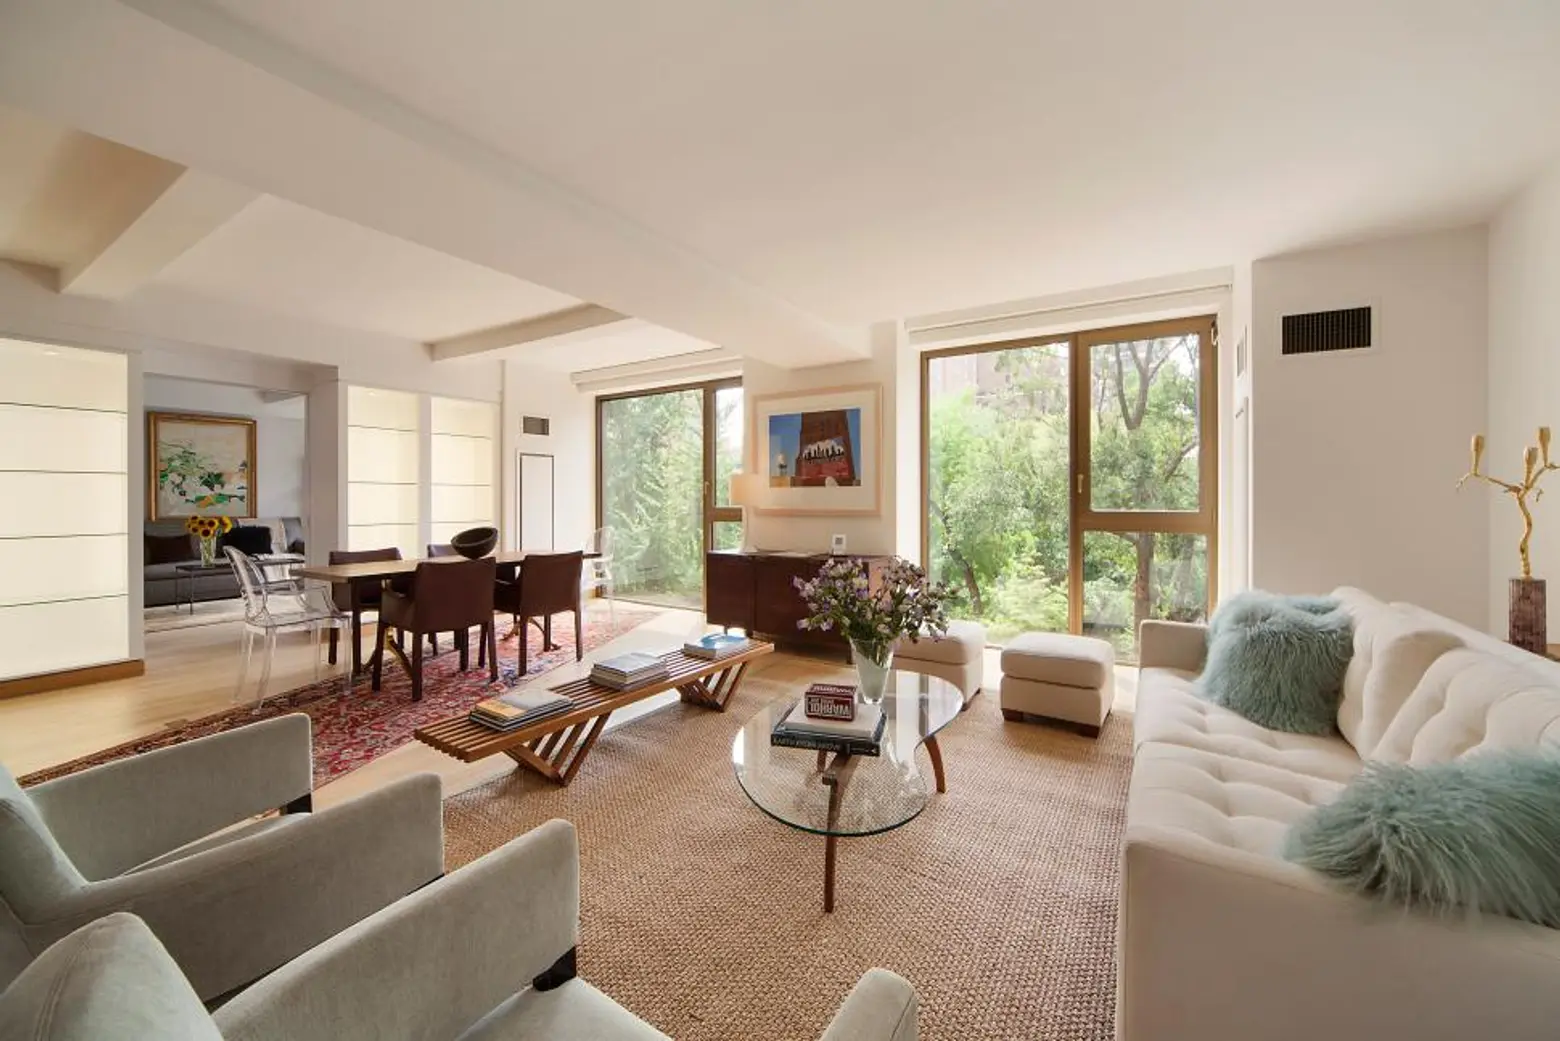 Derek Lam Scoops Up a Light-Filled Apartment in Gramercy Park North for $4.8 Million